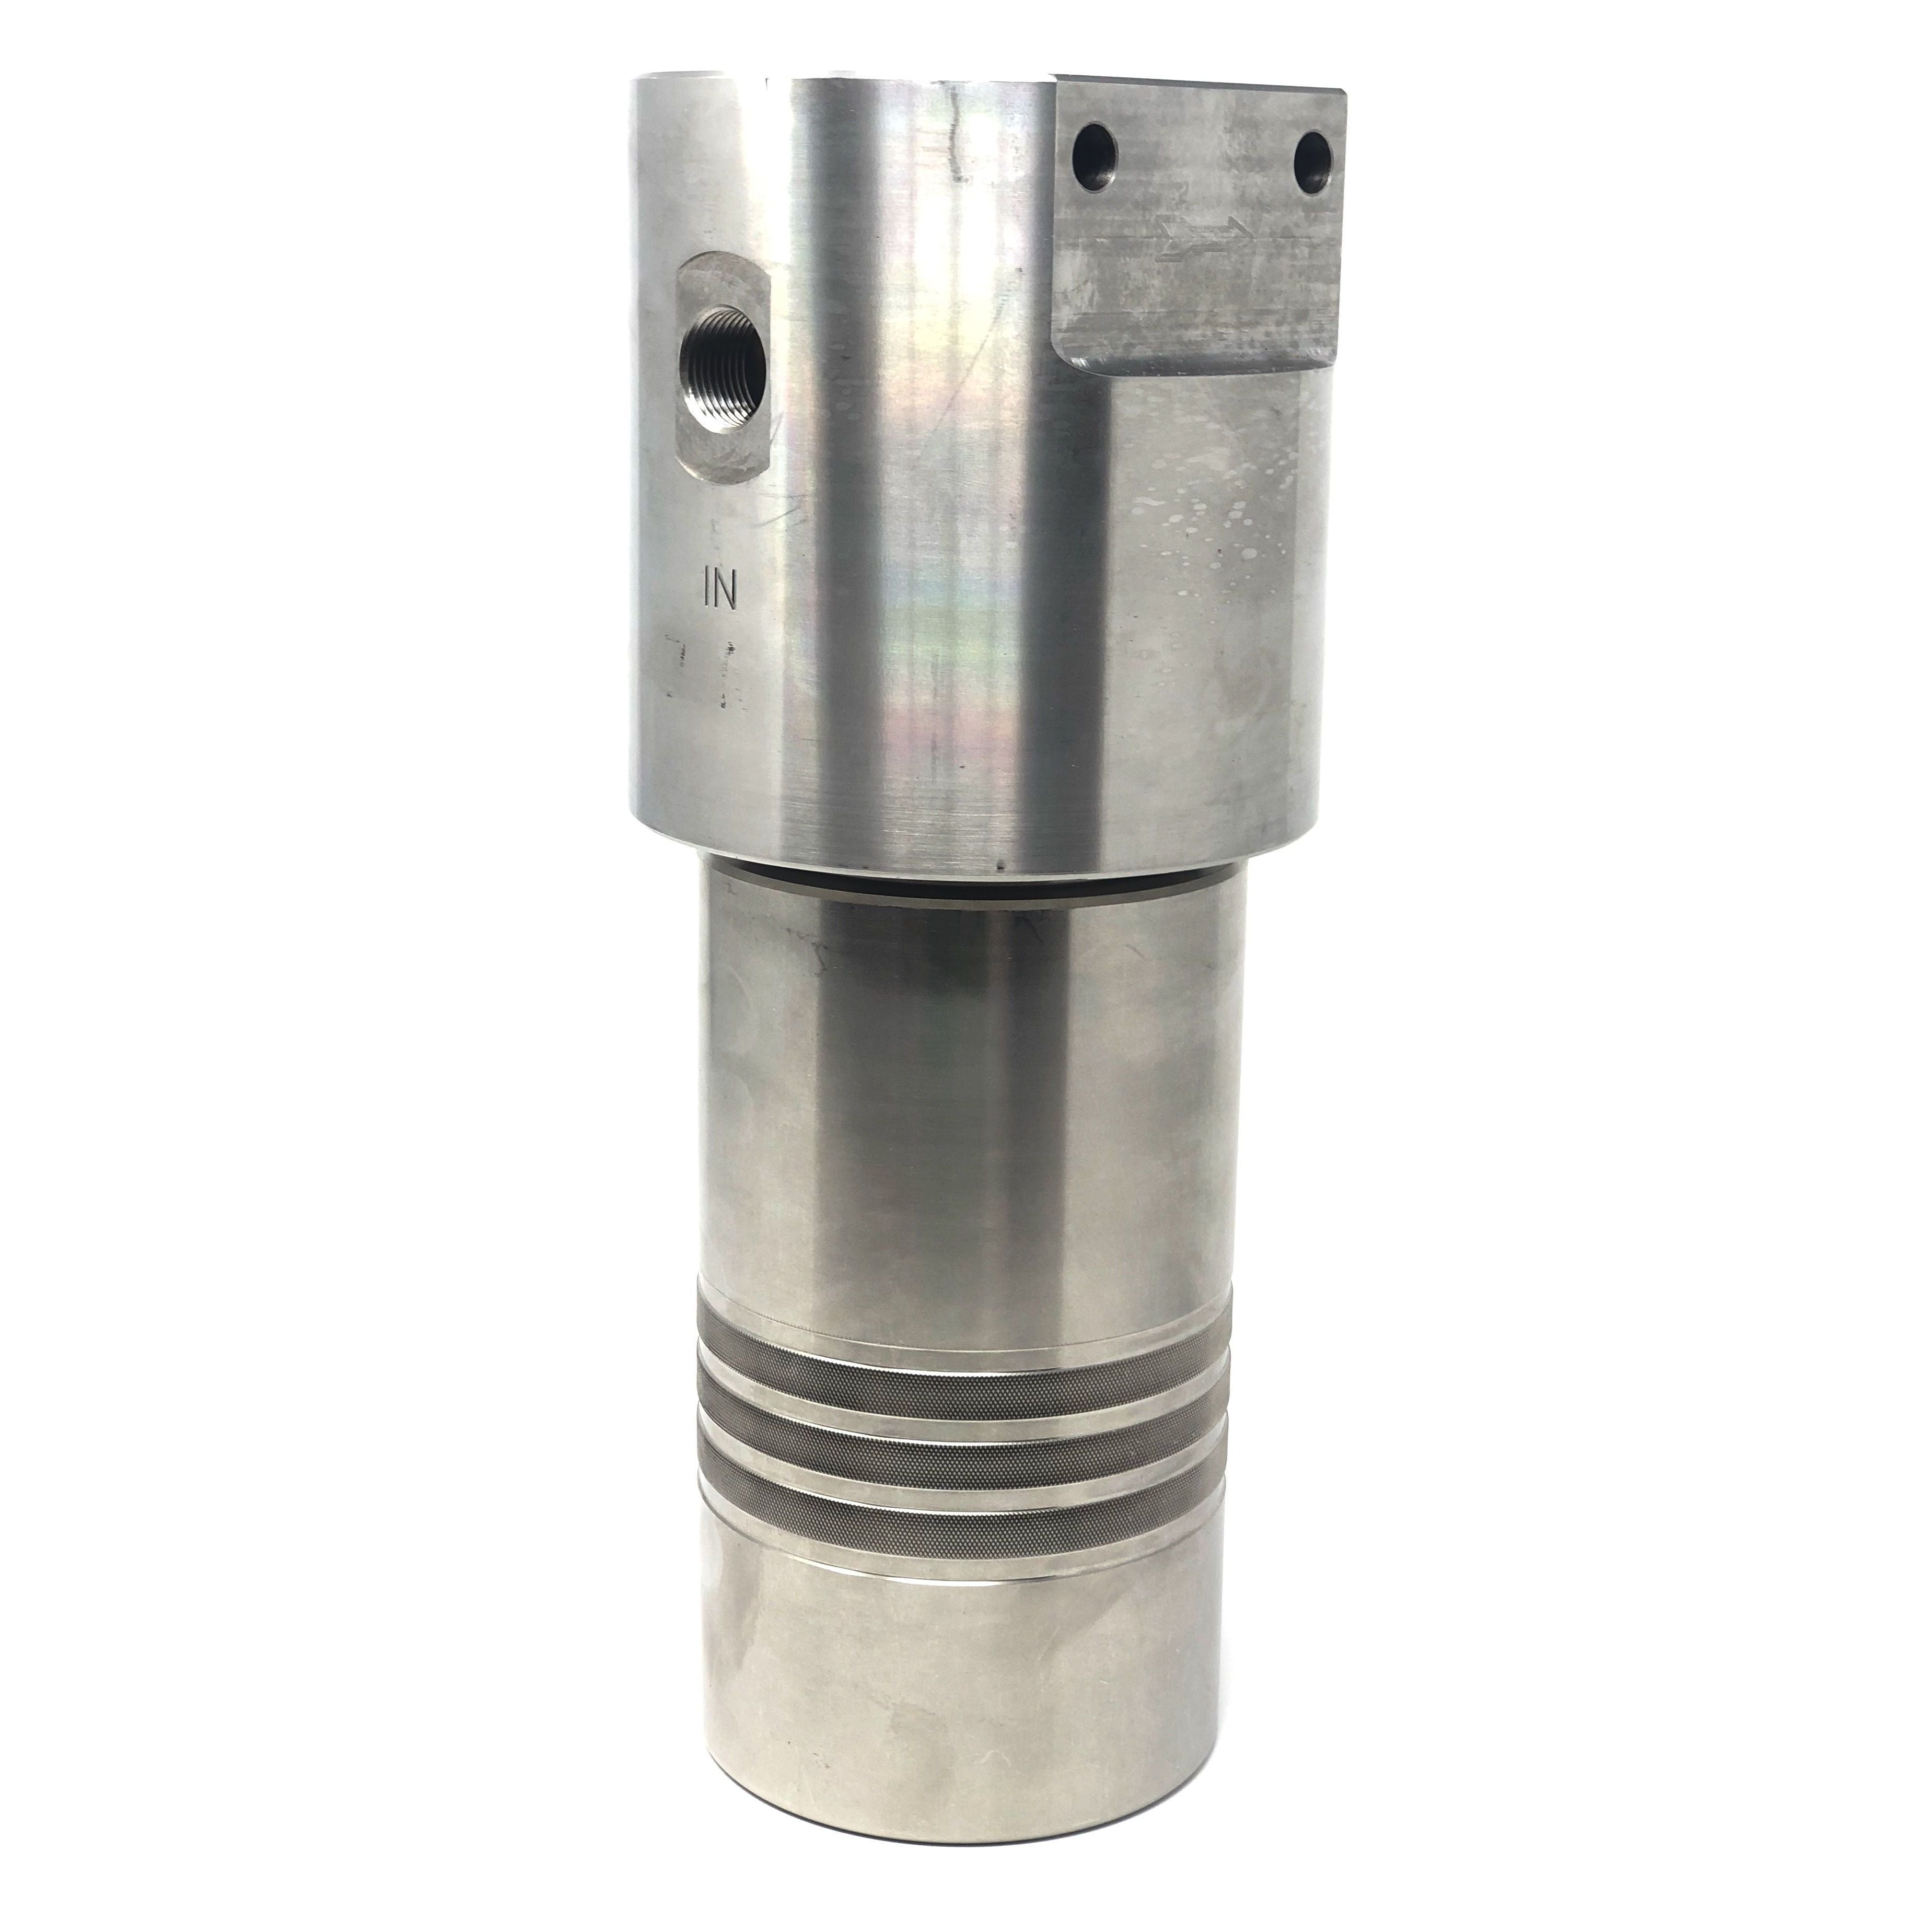 52S-2412S-18SEN : Chase Ultra High Pressure Inline Filter, 10000psi, #12 SAE (3/4"), 18 Micron, With Visual Indicator, No Bypass